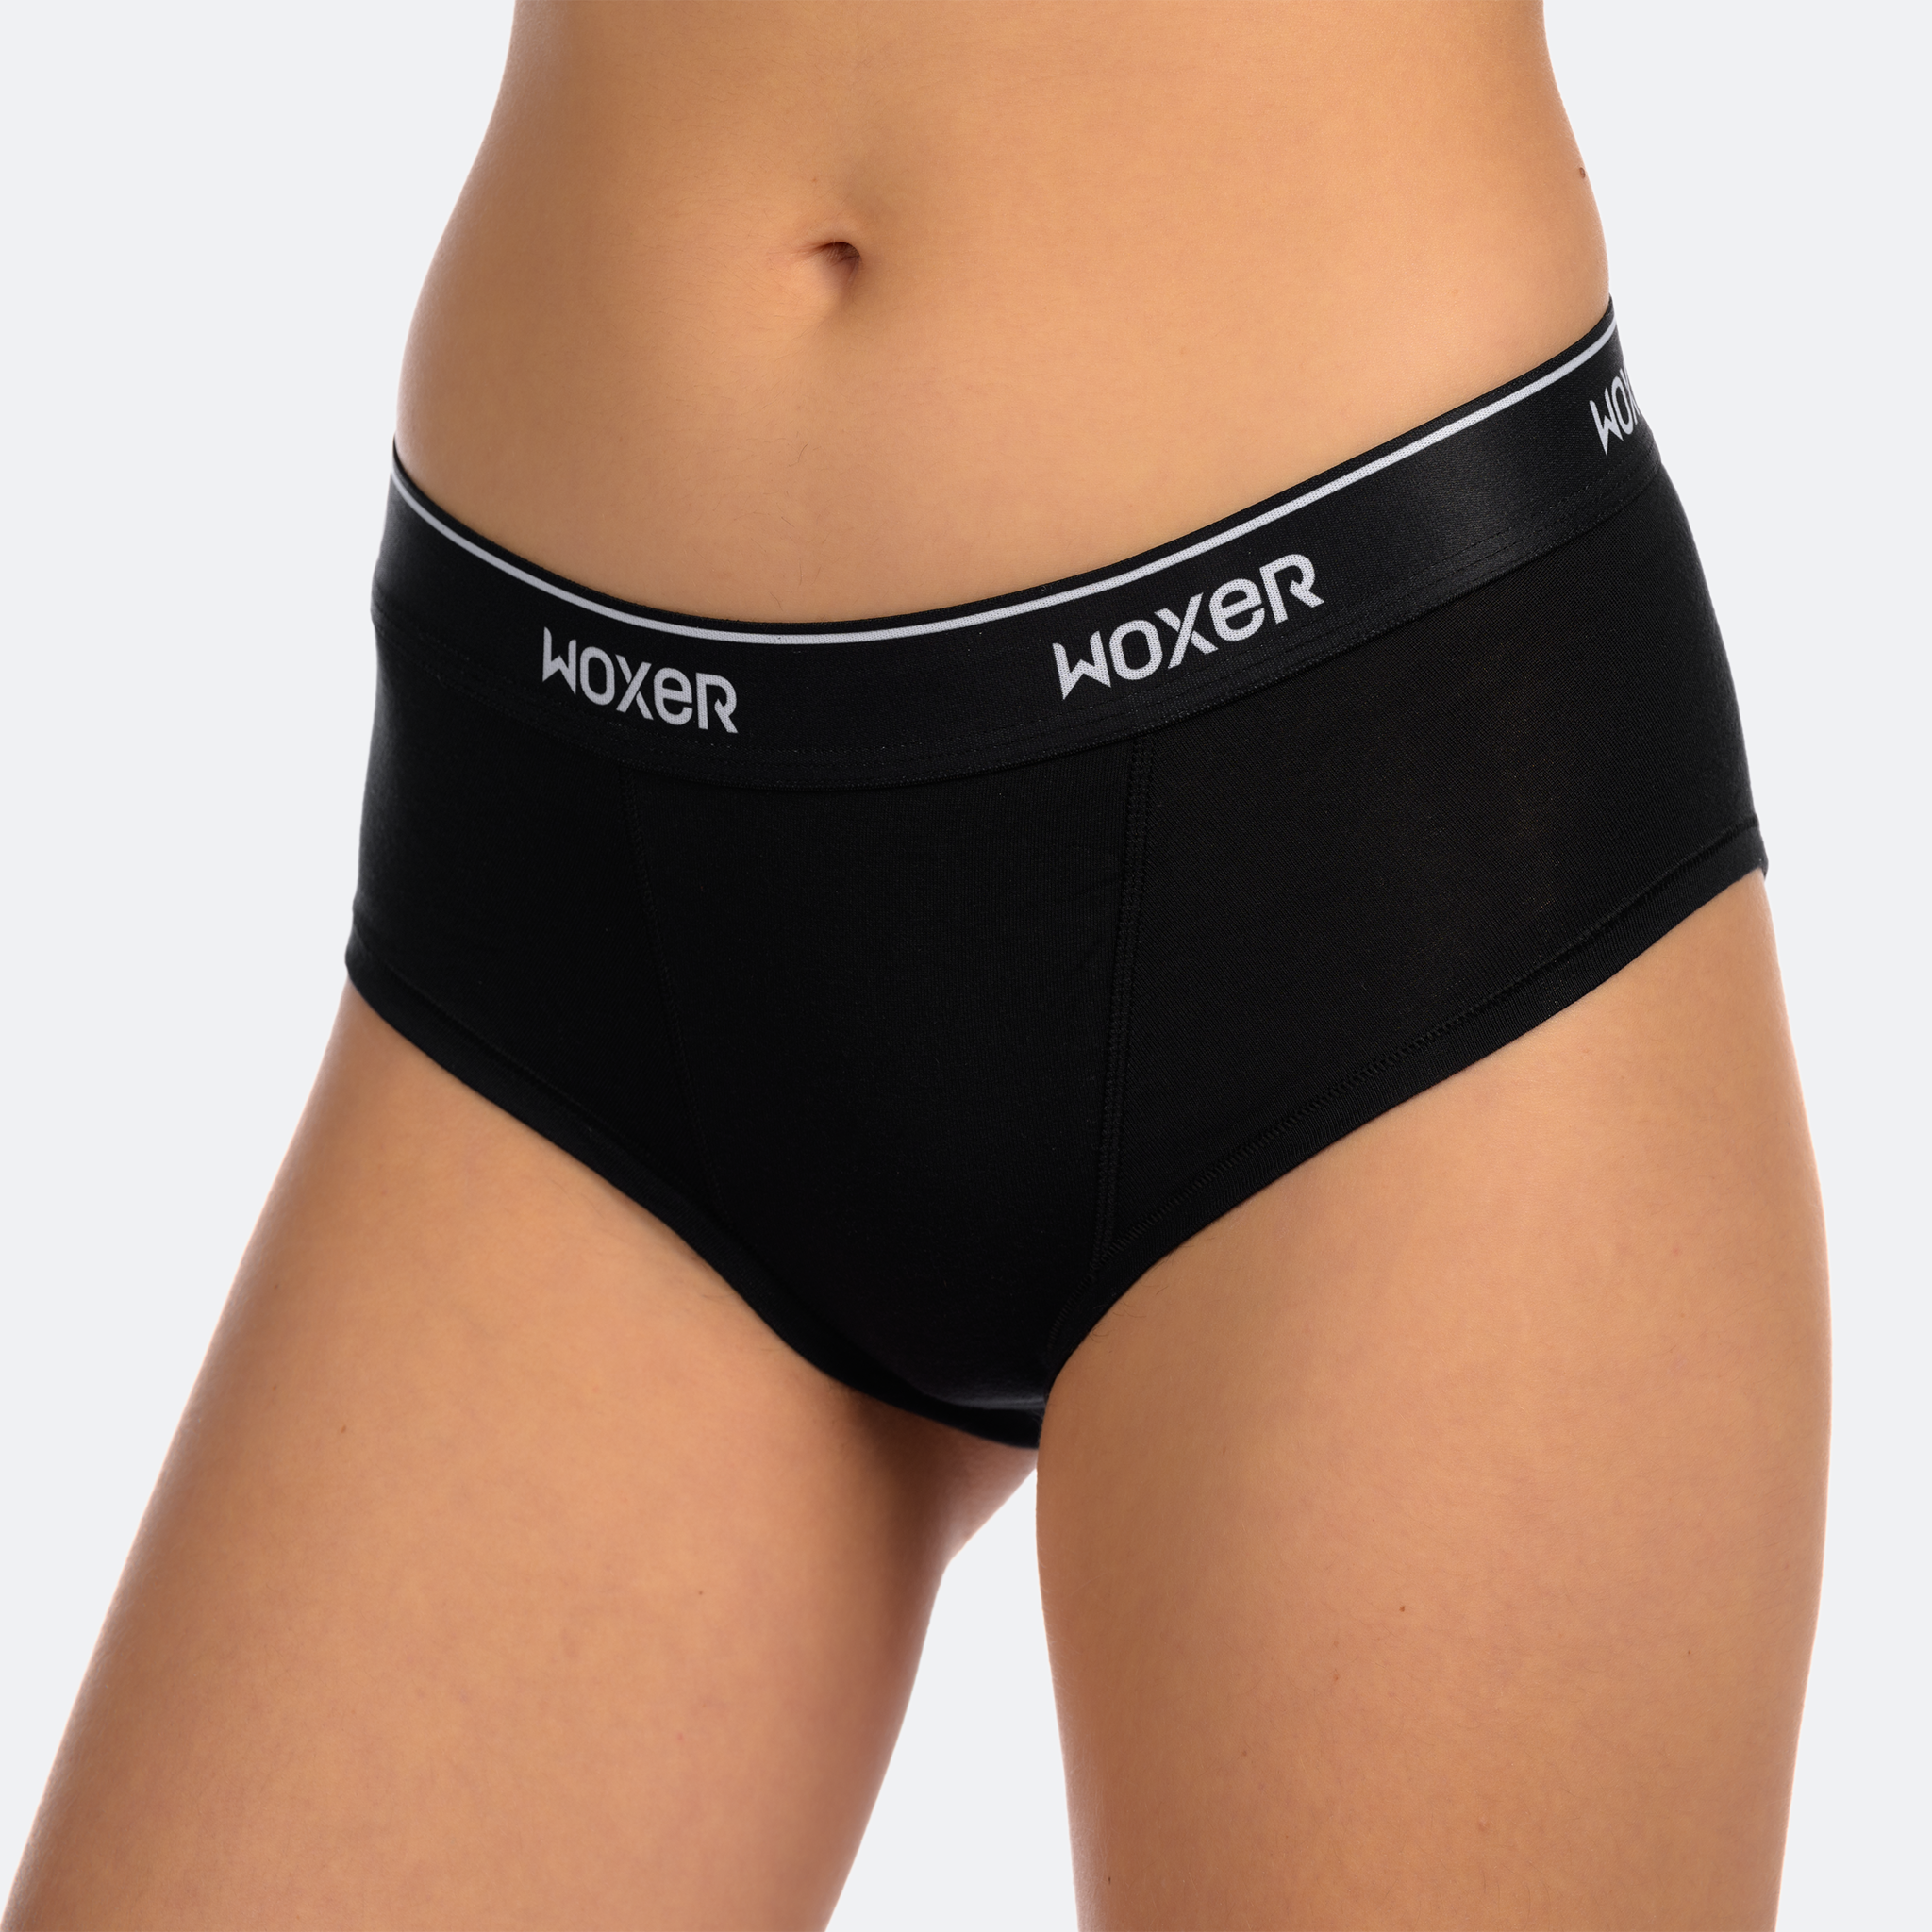 Woxer Womens Boxer Briefs Underwear, Classic Brief Style Boyshorts Panties,  Soft Anti-Chafing, No Roll Inseam Black at  Women's Clothing store